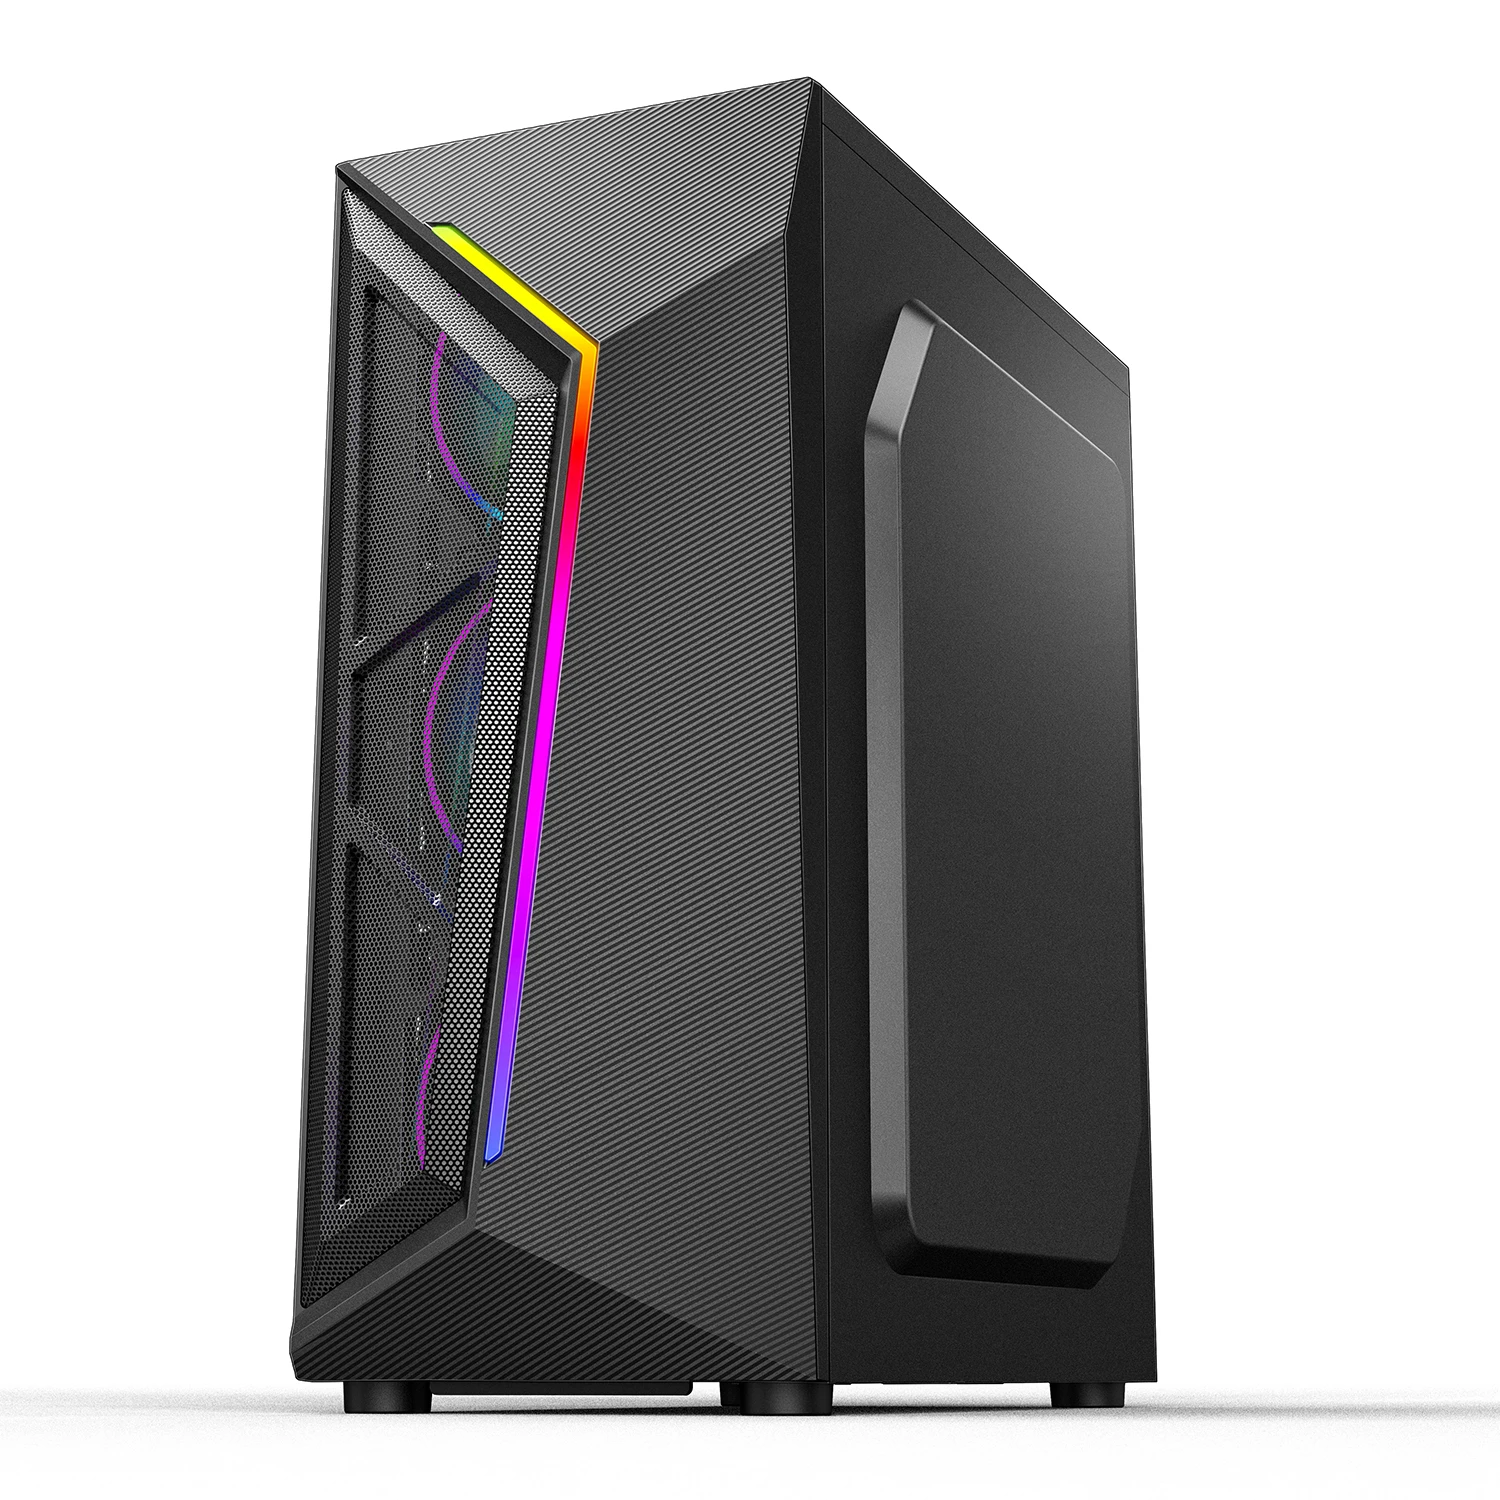 

Hot Selling Desktop ATX PC Cabinet PC Gaming Case Computer with RGB strip light, Black,white